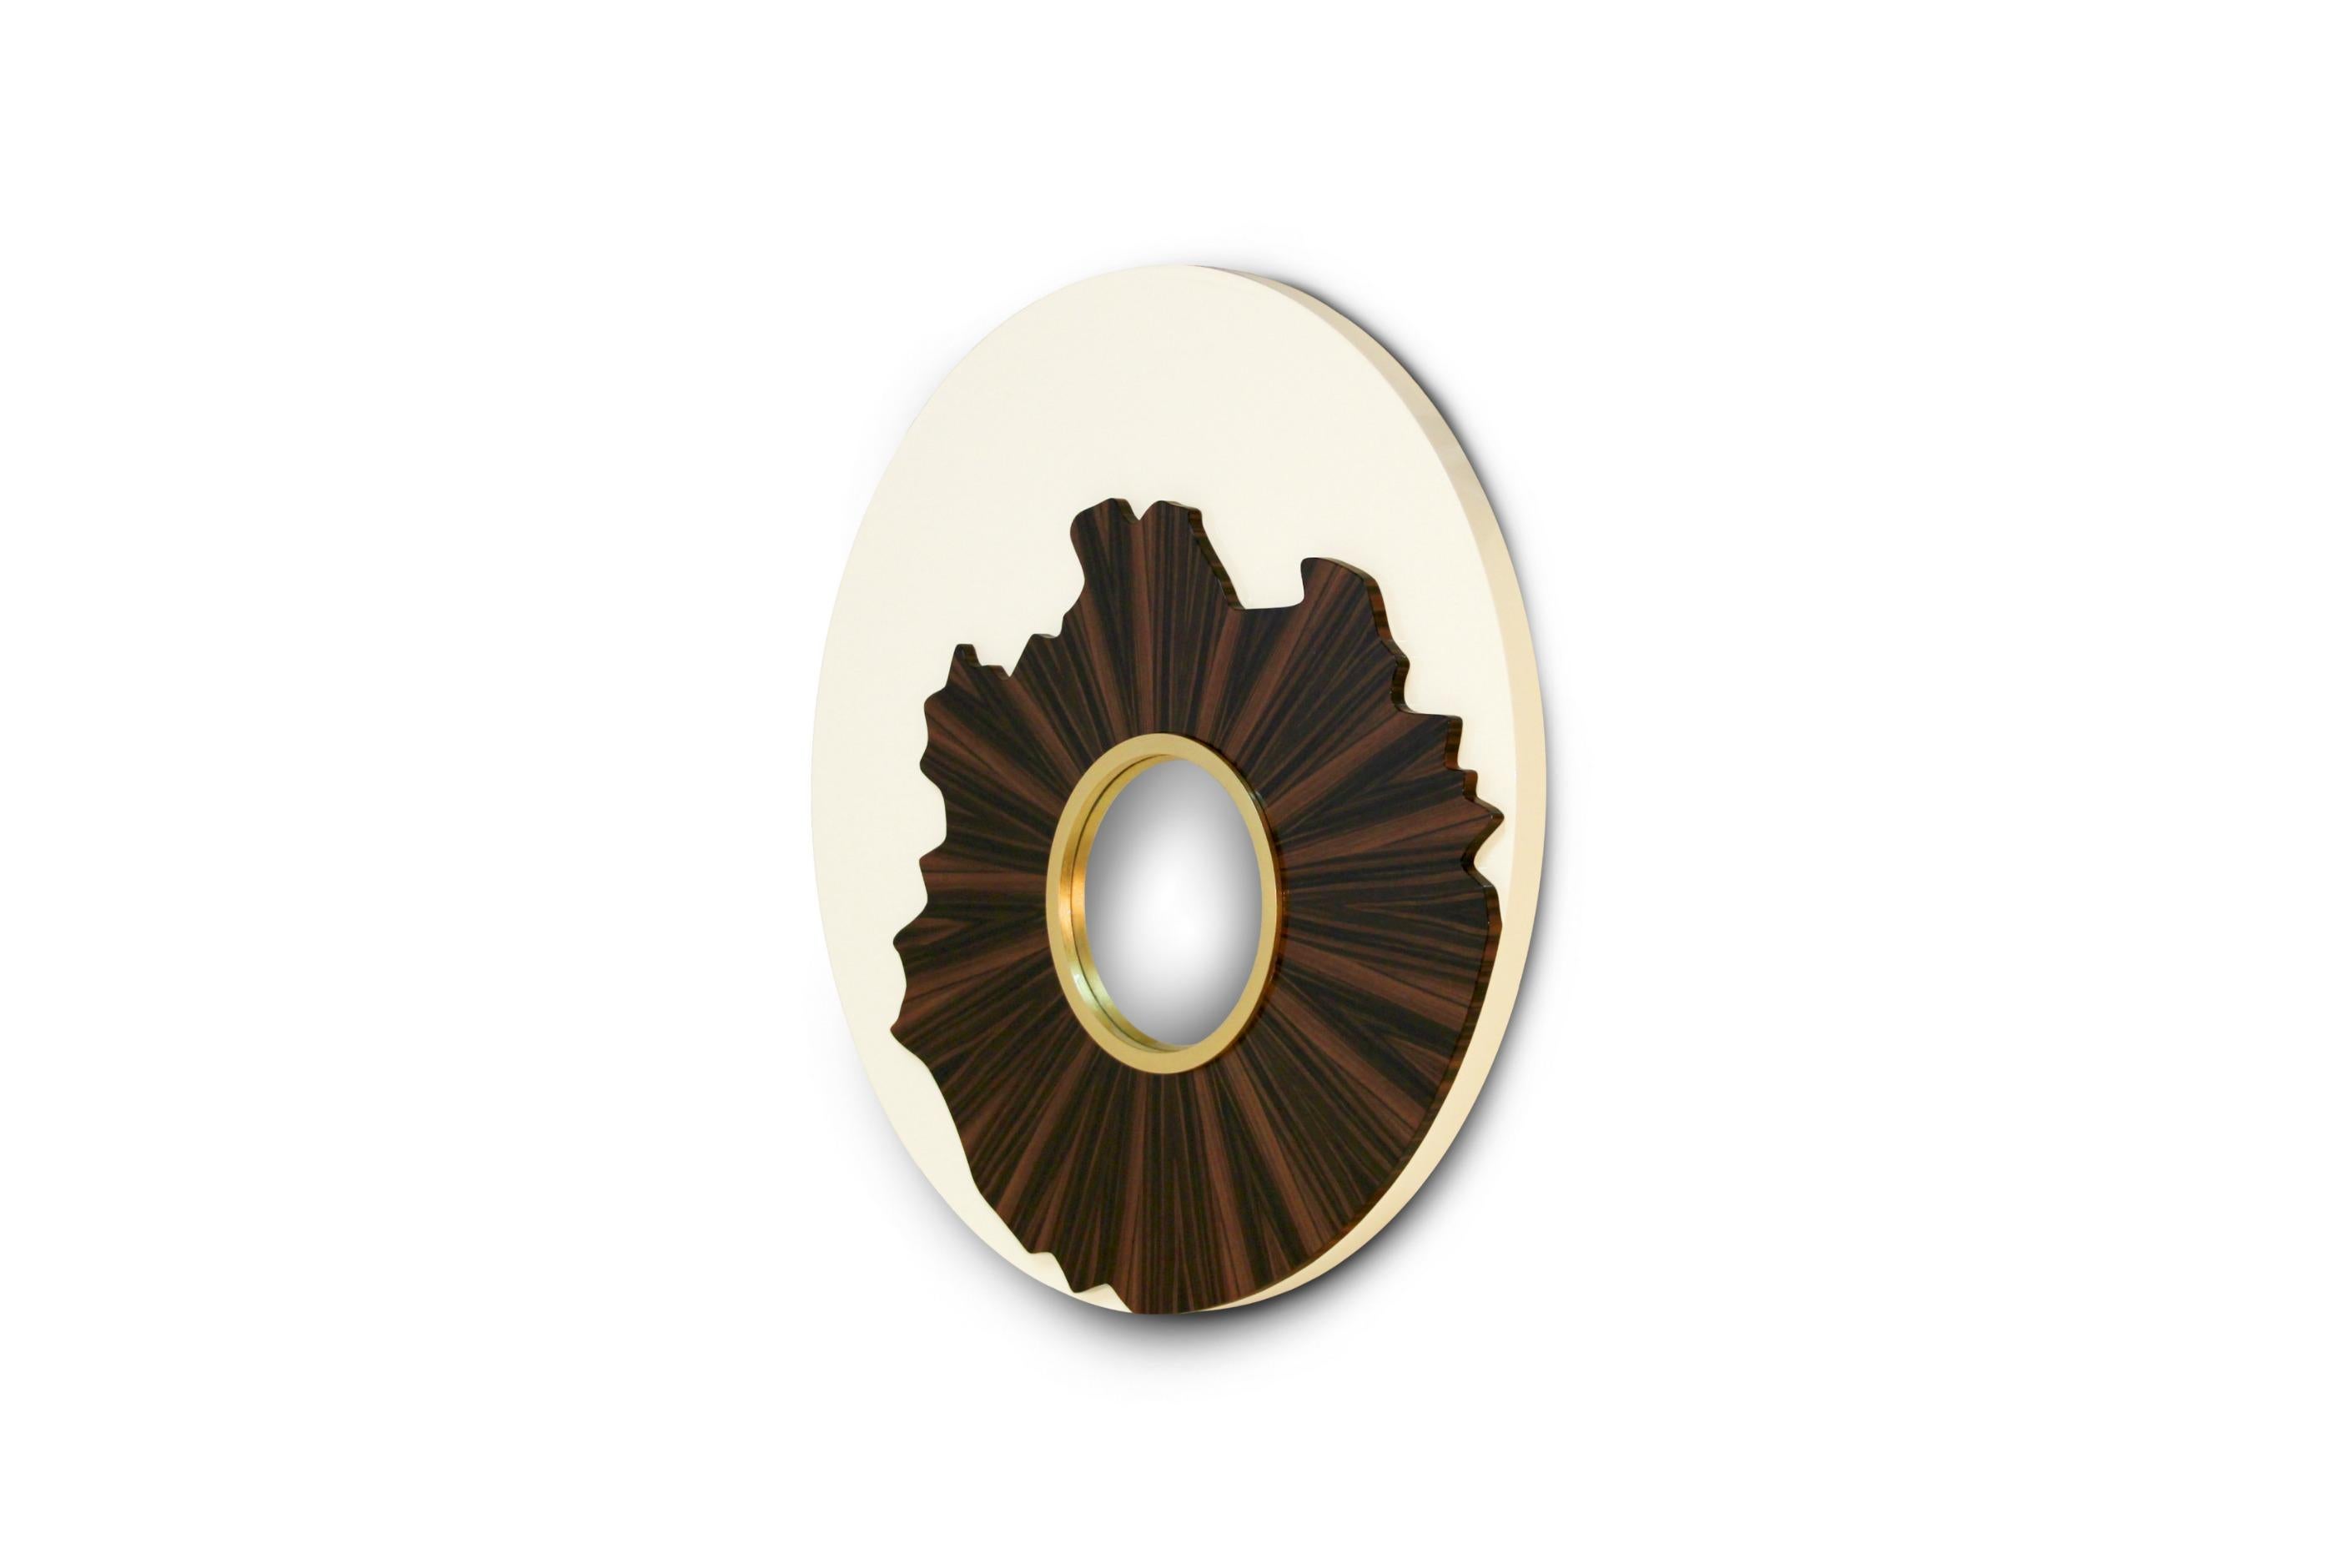 Iris is the part of the eye that changes and controls our perception of light, shapes and colours. IRIS Round Mirror enhances all these features through its structure in lacquer, palisander wood veneer, golden leaf and convex mirror. Bring allure to